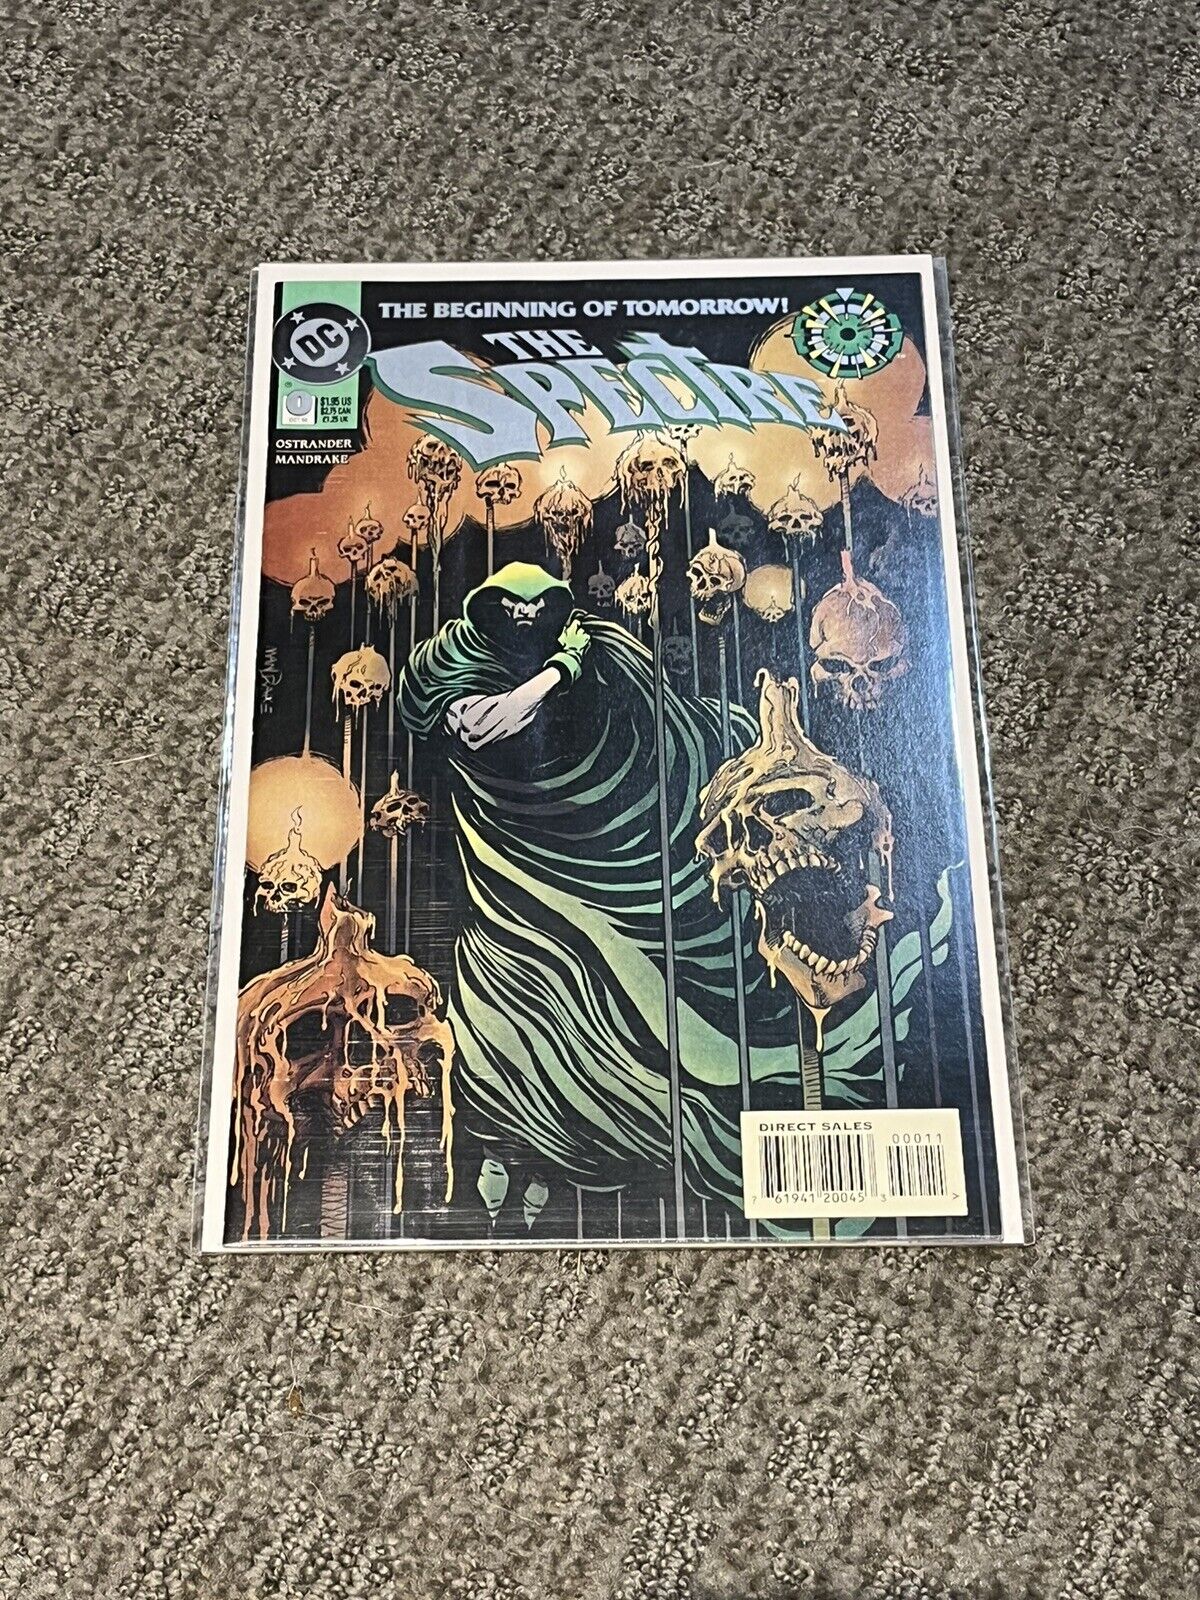 DC Comics The Spectre #0 -1994 The Beginning of Tomorrow NM/M